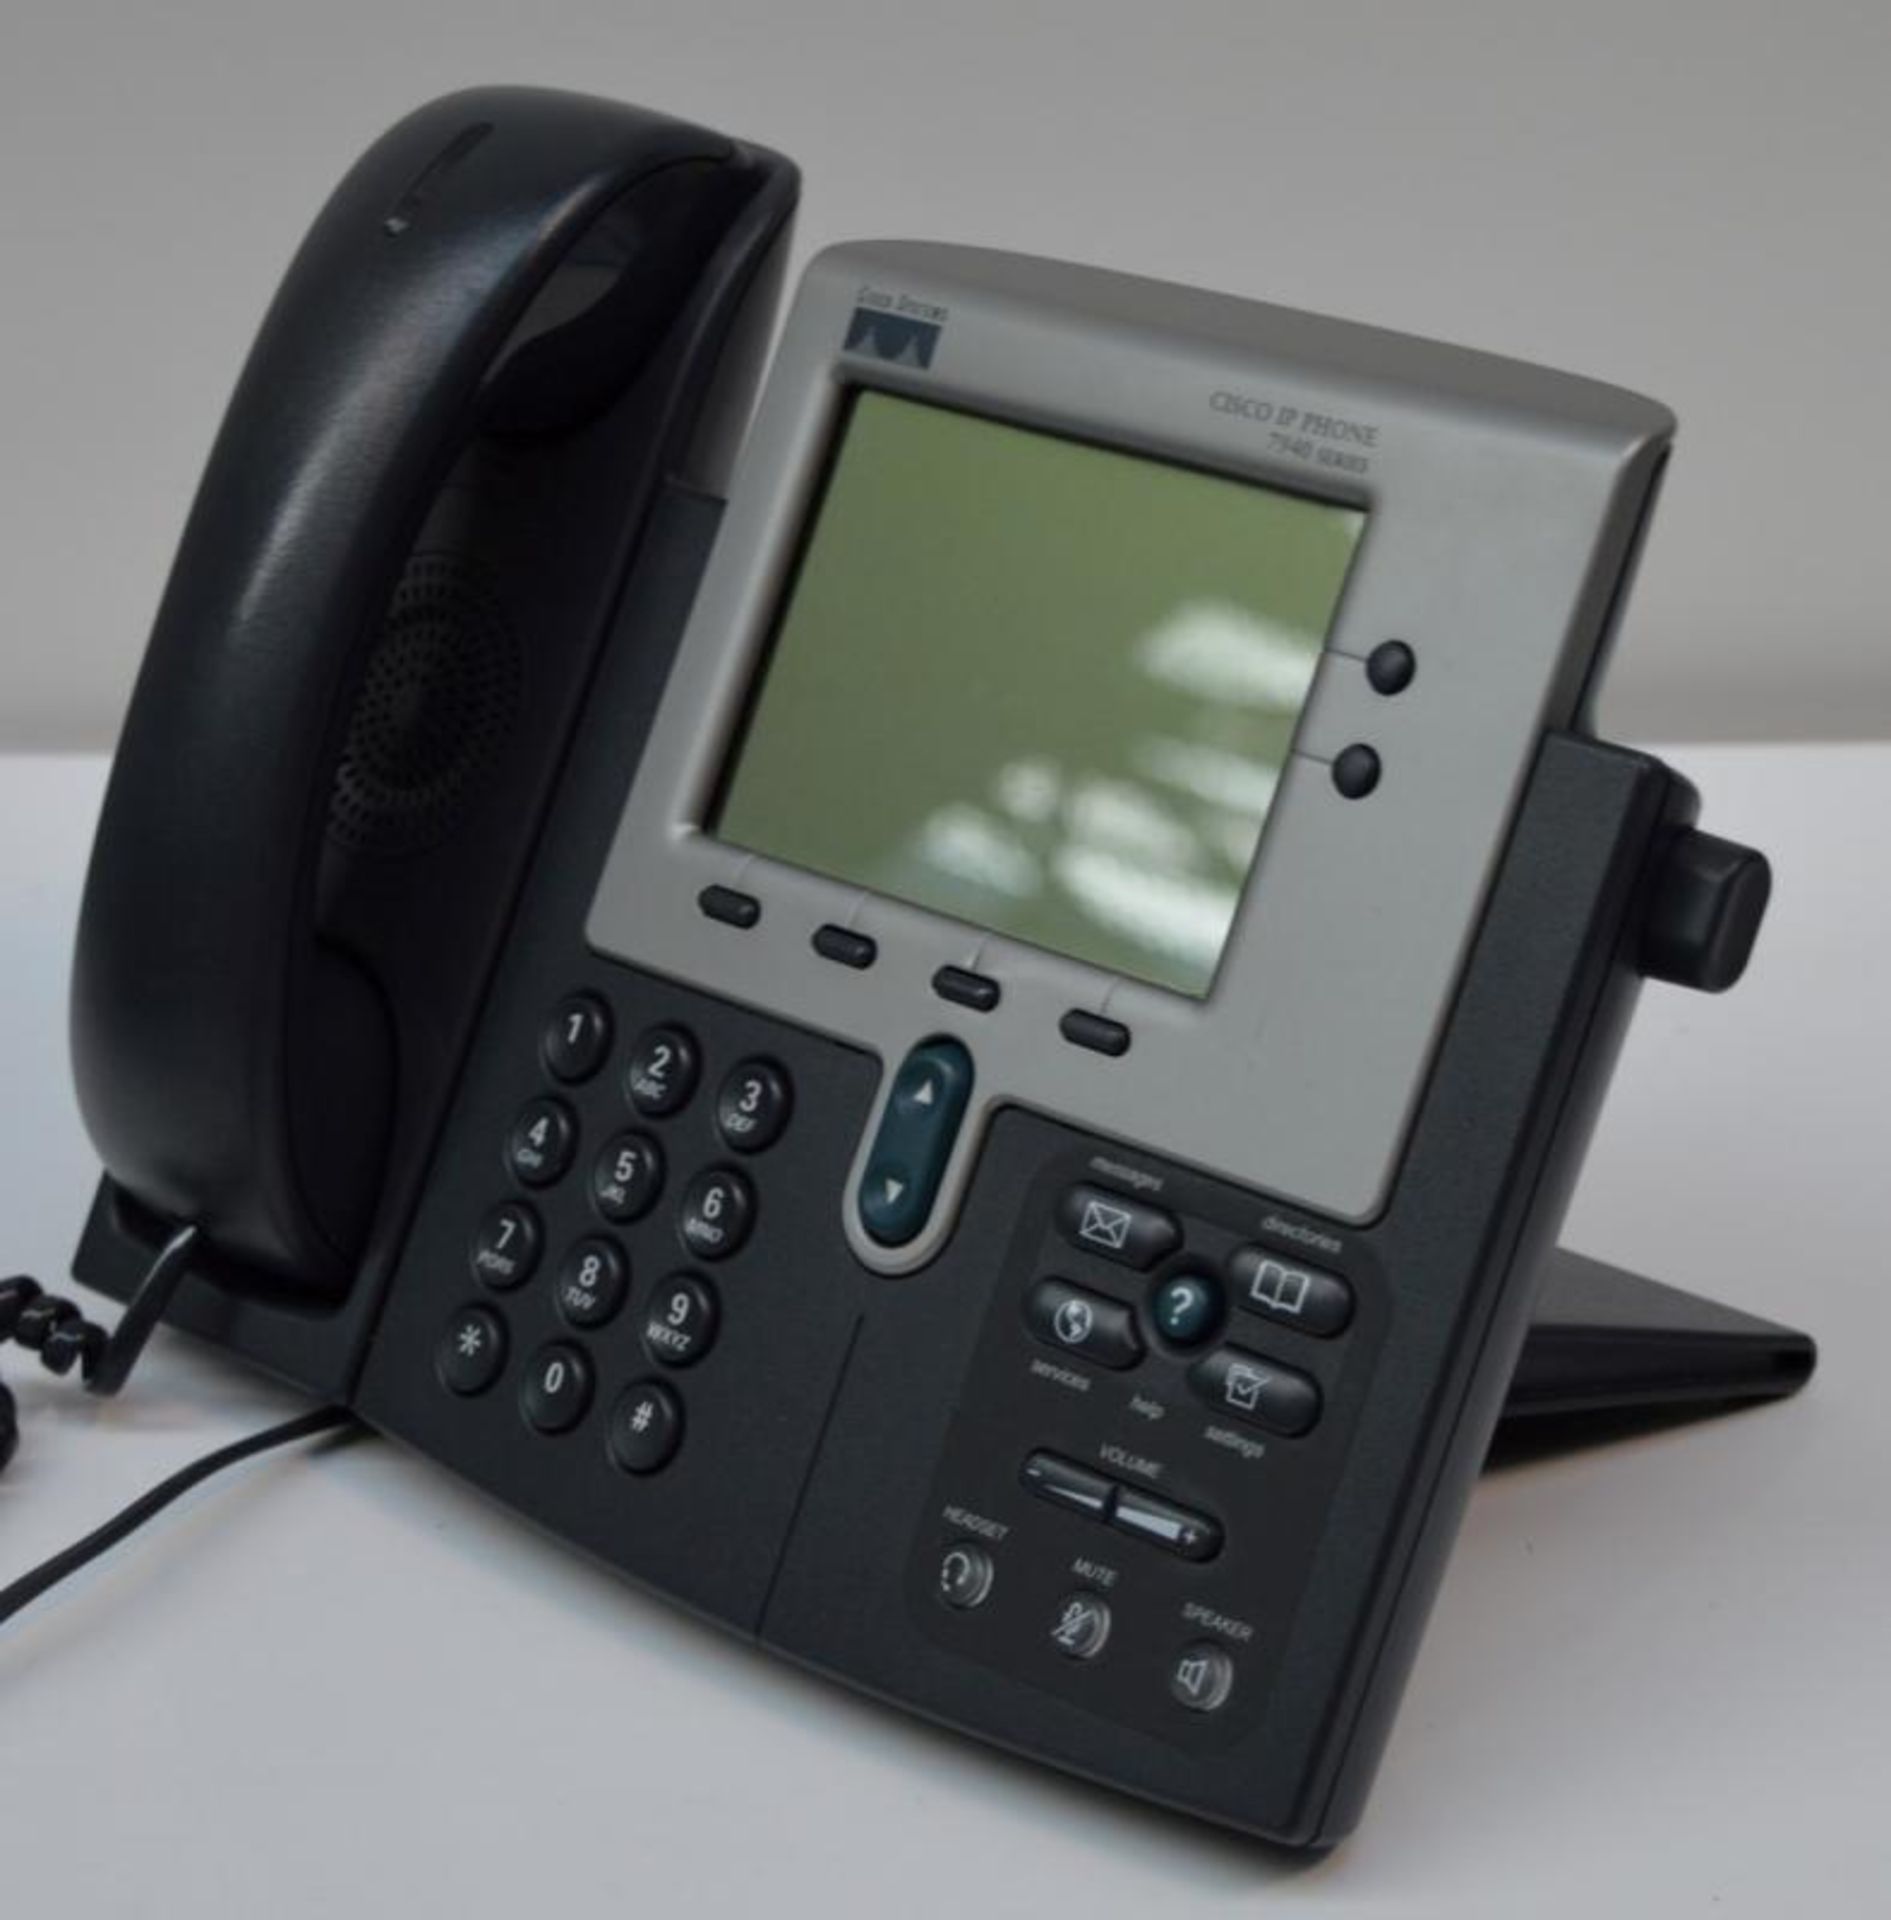 4 x Cisco CP-7940G IP Phone VOIP Telephone LCD Display Phones - Removed From a Working Office Enviro - Image 4 of 6